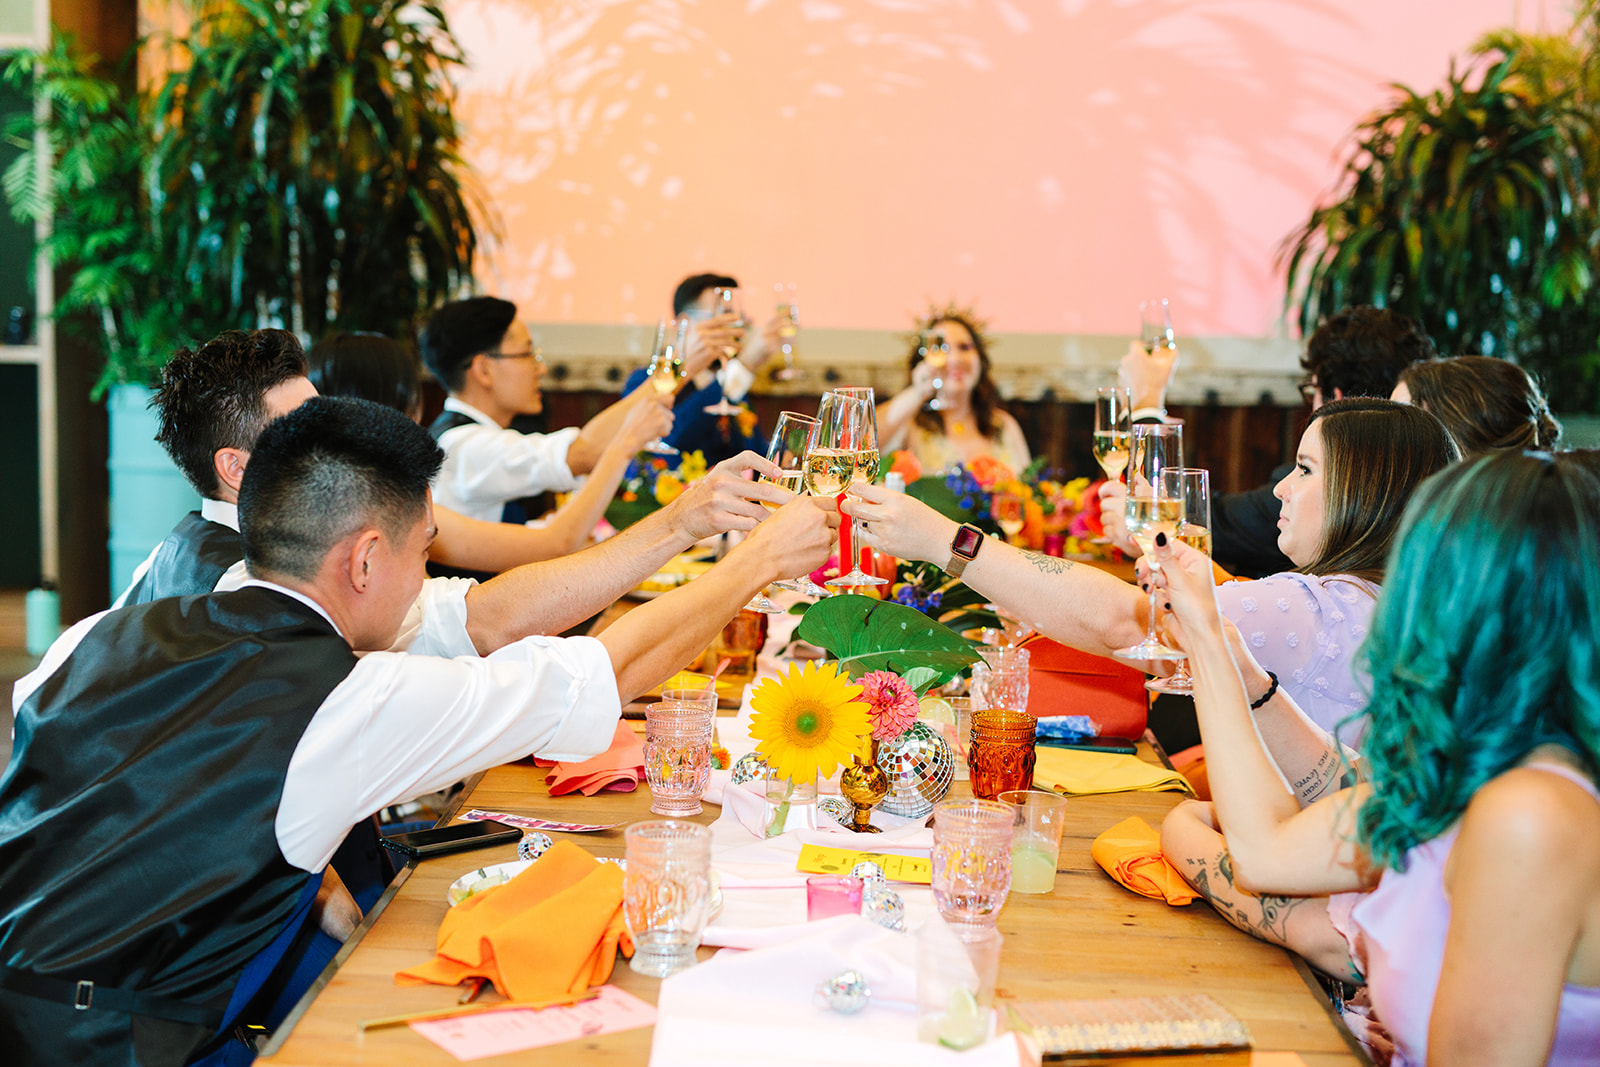 Toast at wedding reception | Colorful Downtown Los Angeles Valentine Wedding | Los Angeles wedding photographer | #losangeleswedding #colorfulwedding #DTLA #valentinedtla   Source: Mary Costa Photography | Los Angeles